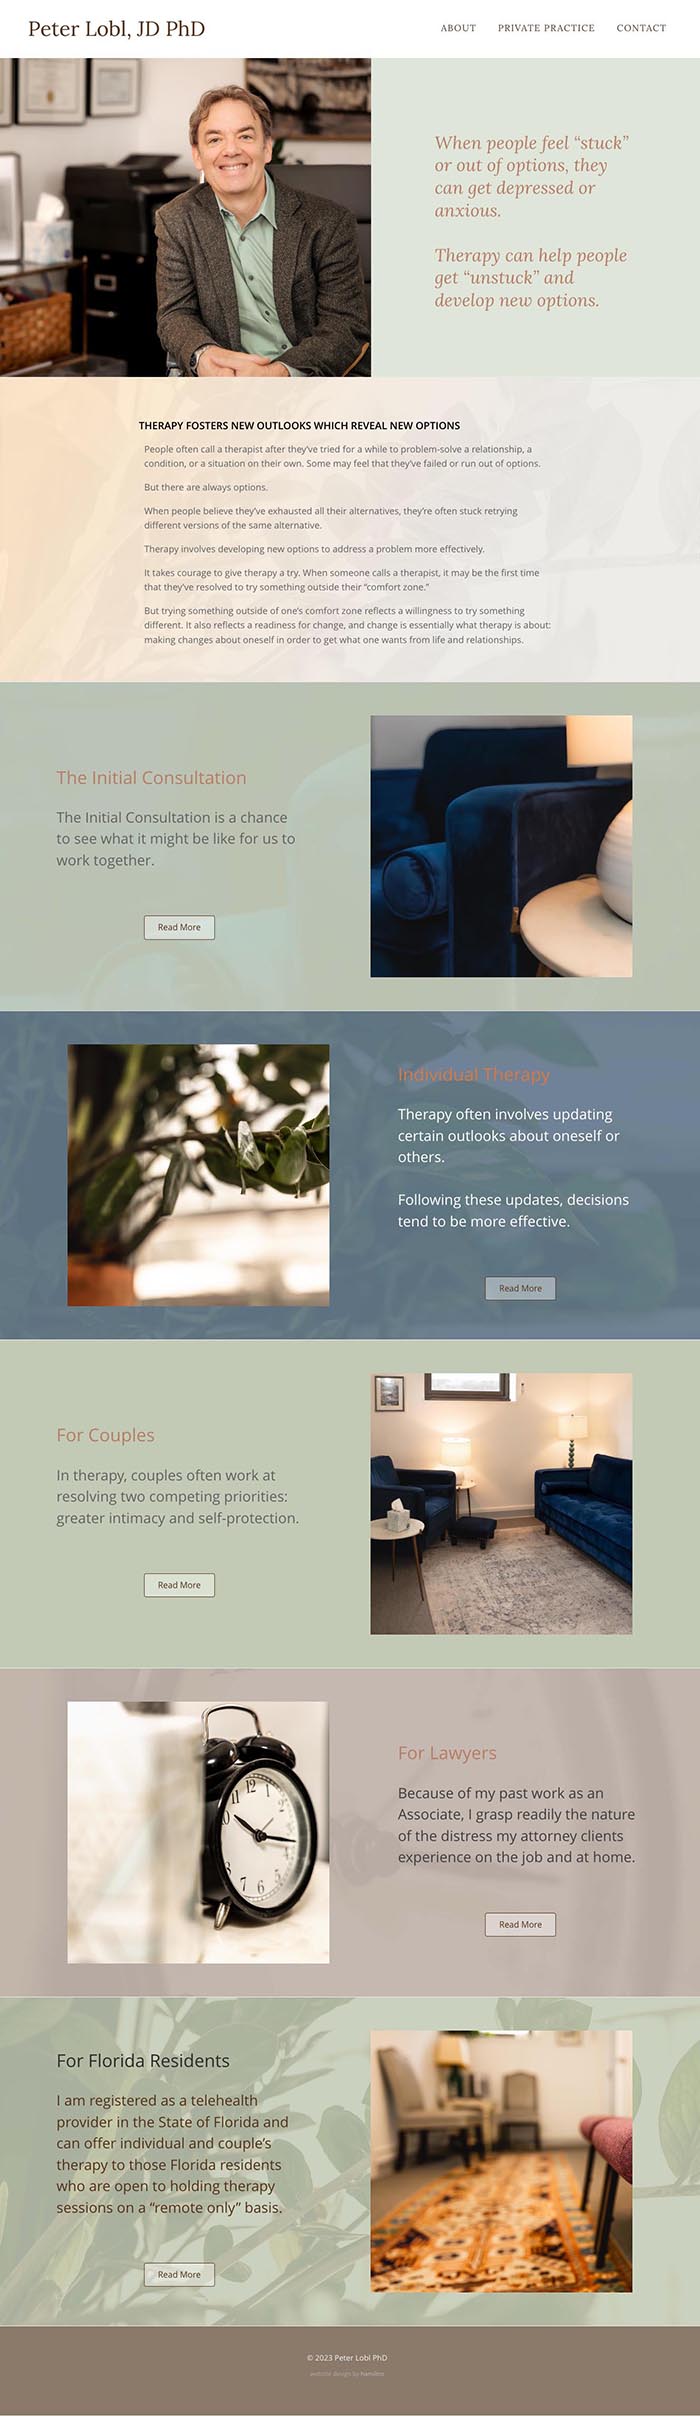 Website design for a therapist in New York. The long-scrolling homepage features sections that introduce the therapist and his work with large images one one side and texts on the other side (alternating sides from section to section). Each background has a rich but subtle background image. This therapist specializes in helping lawyers so one section is dedicated to his work with lawyers.